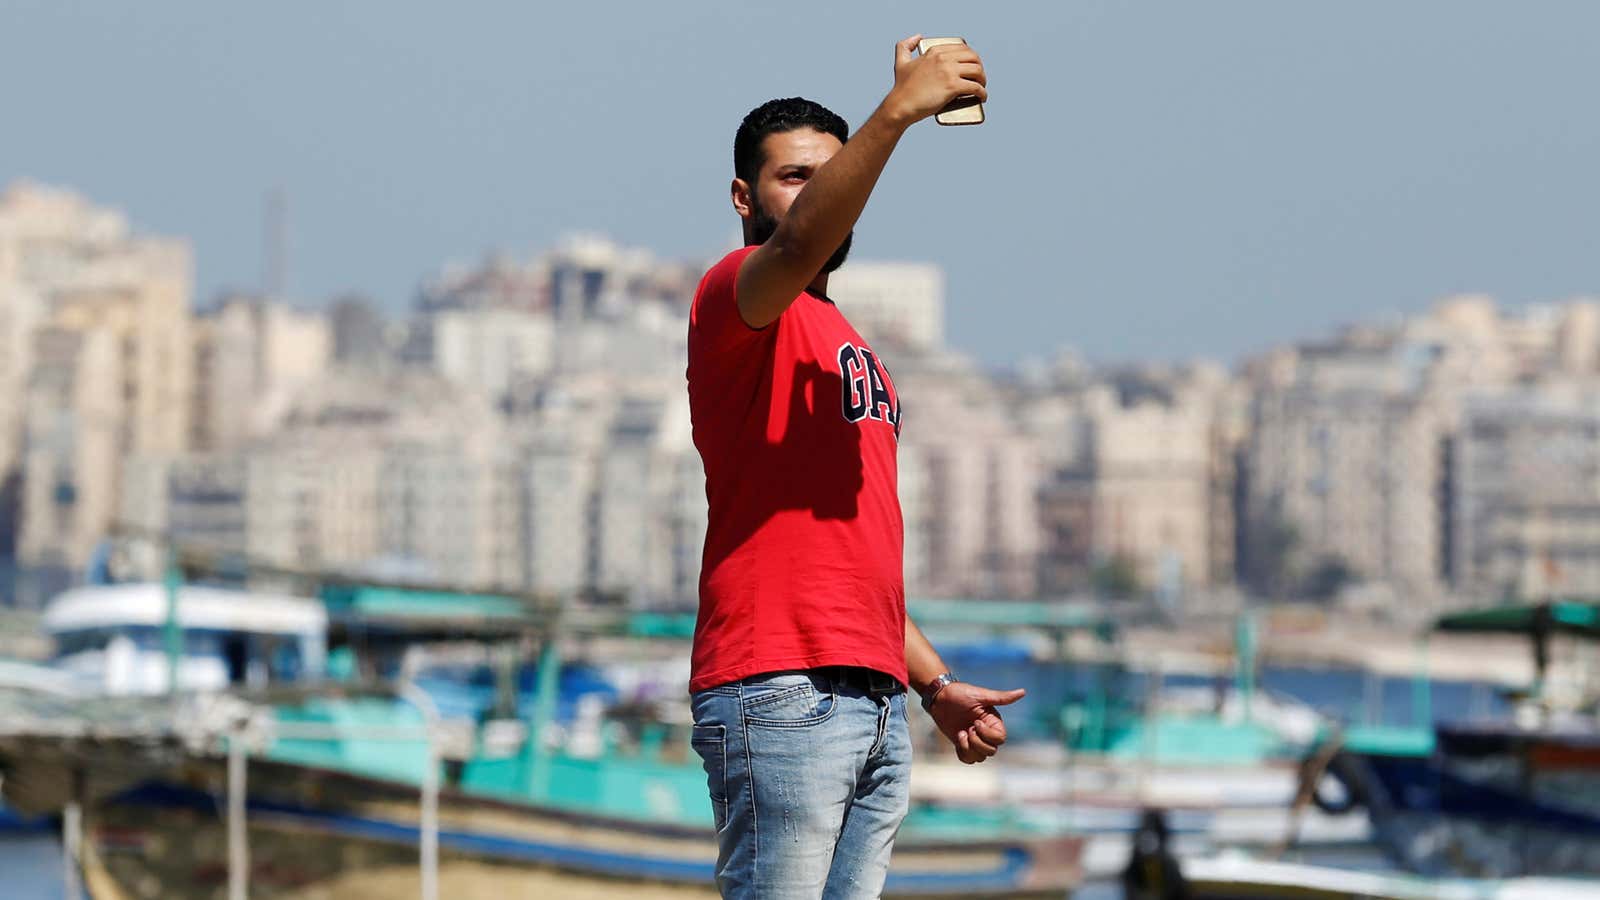 Smartphone use has risen rapidly among young Egyptians